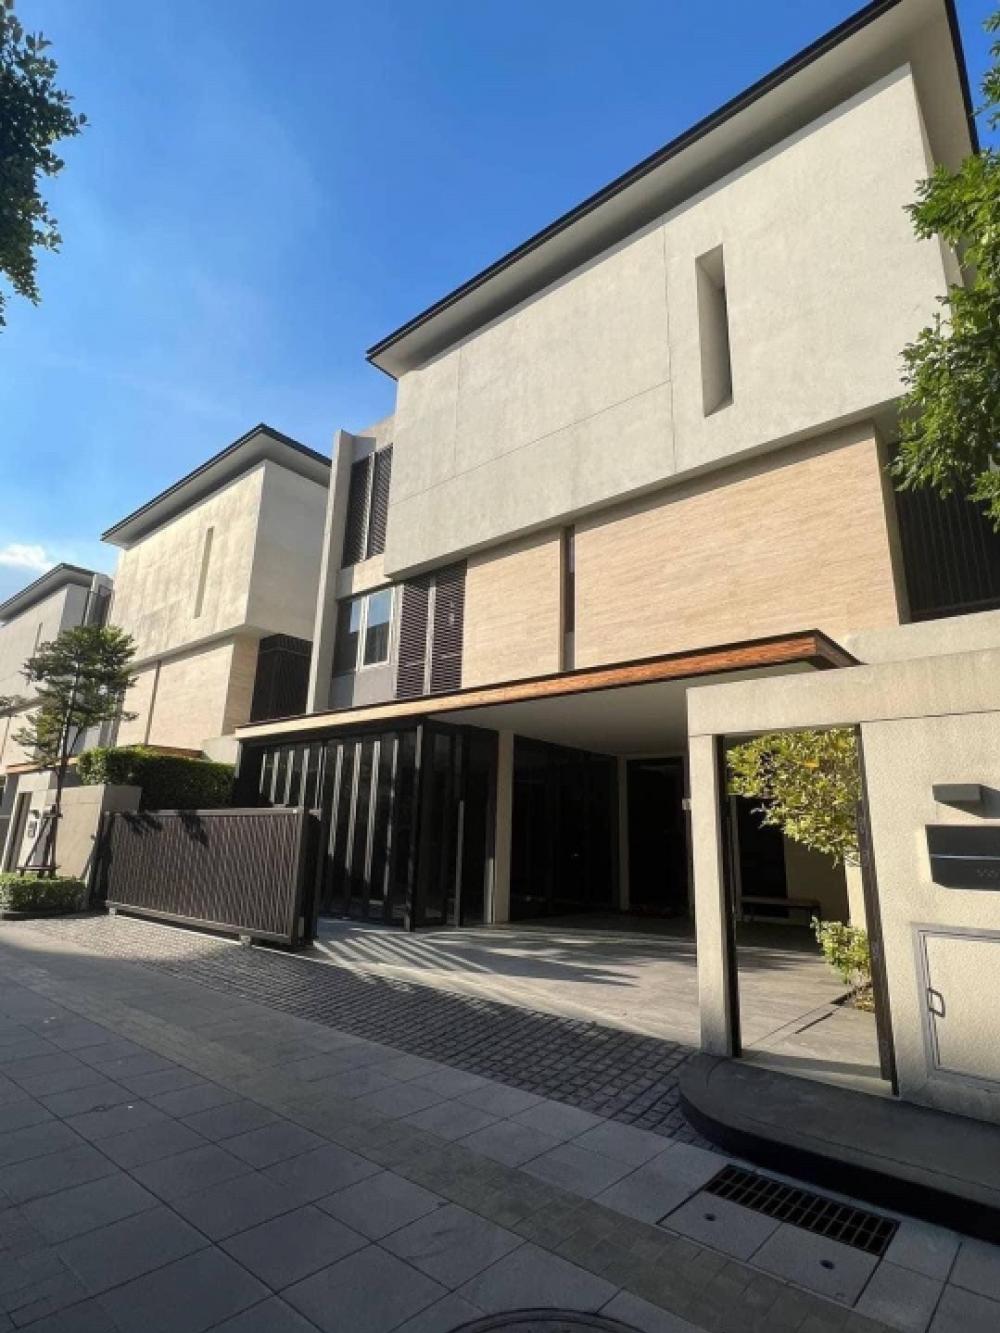 For SaleHouseRama9, Petchburi, RCA : Selling : Ultra Luxury House In Rama 9  , 4 Bed 5 Bath , 530 sqm , 90 sqw , 4 Parking Lot 

🔥🔥Selling Price : 65,000,000 THB 🔥🔥

More Information
📱Tel : 061-9979915 / Kat
📱Line : 0619979915 
http://line.me/ti/p/~0619979915 
For More Details : 
htt